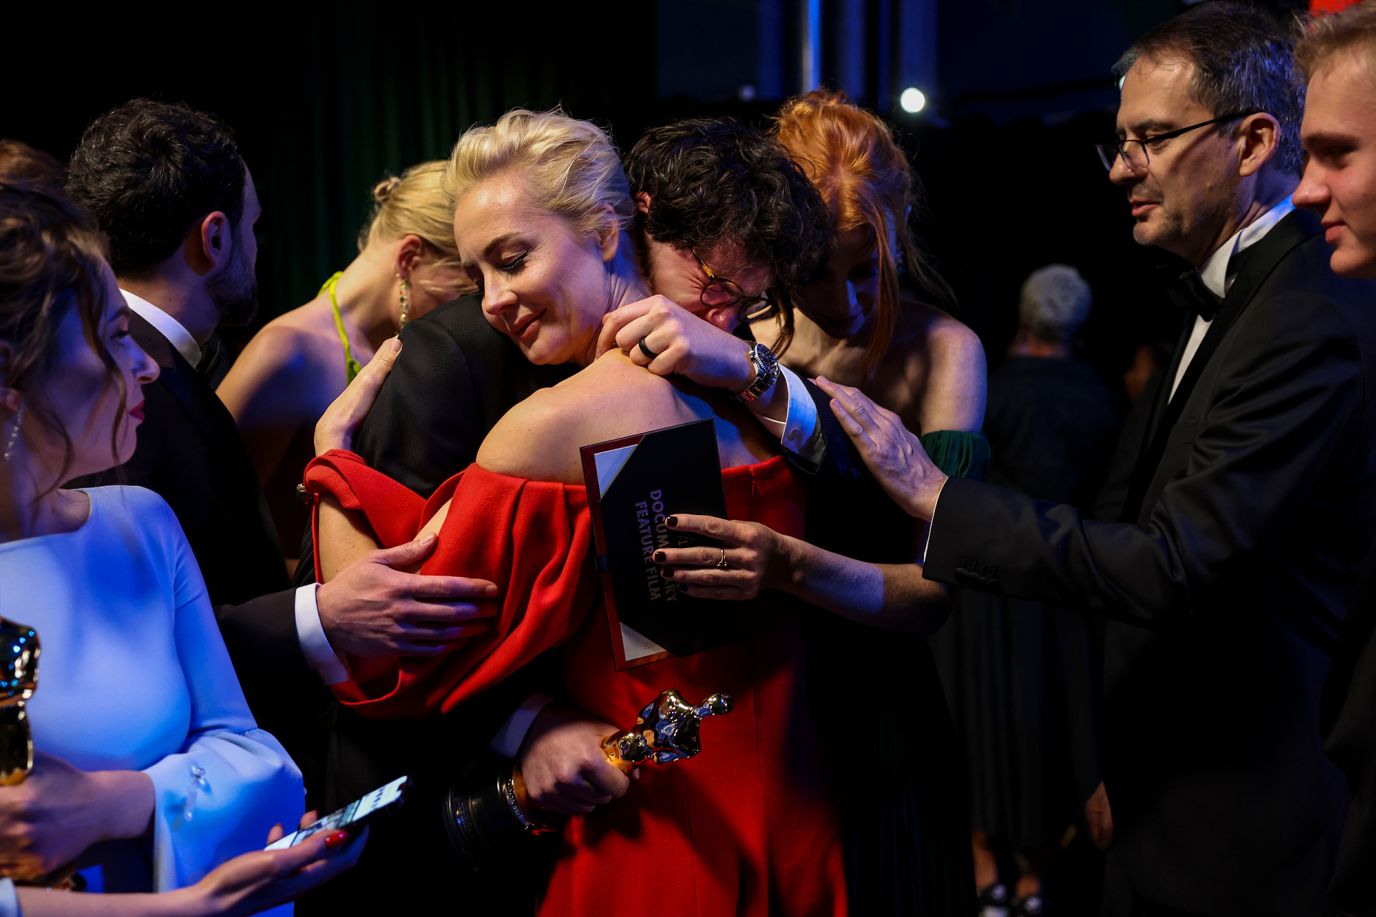 Yulia Navalny, wife of Russian opposition leader Alexey Navalny, hugs filmmaker Daniel Roher after "Navalny" won the Oscar for best documentary feature.